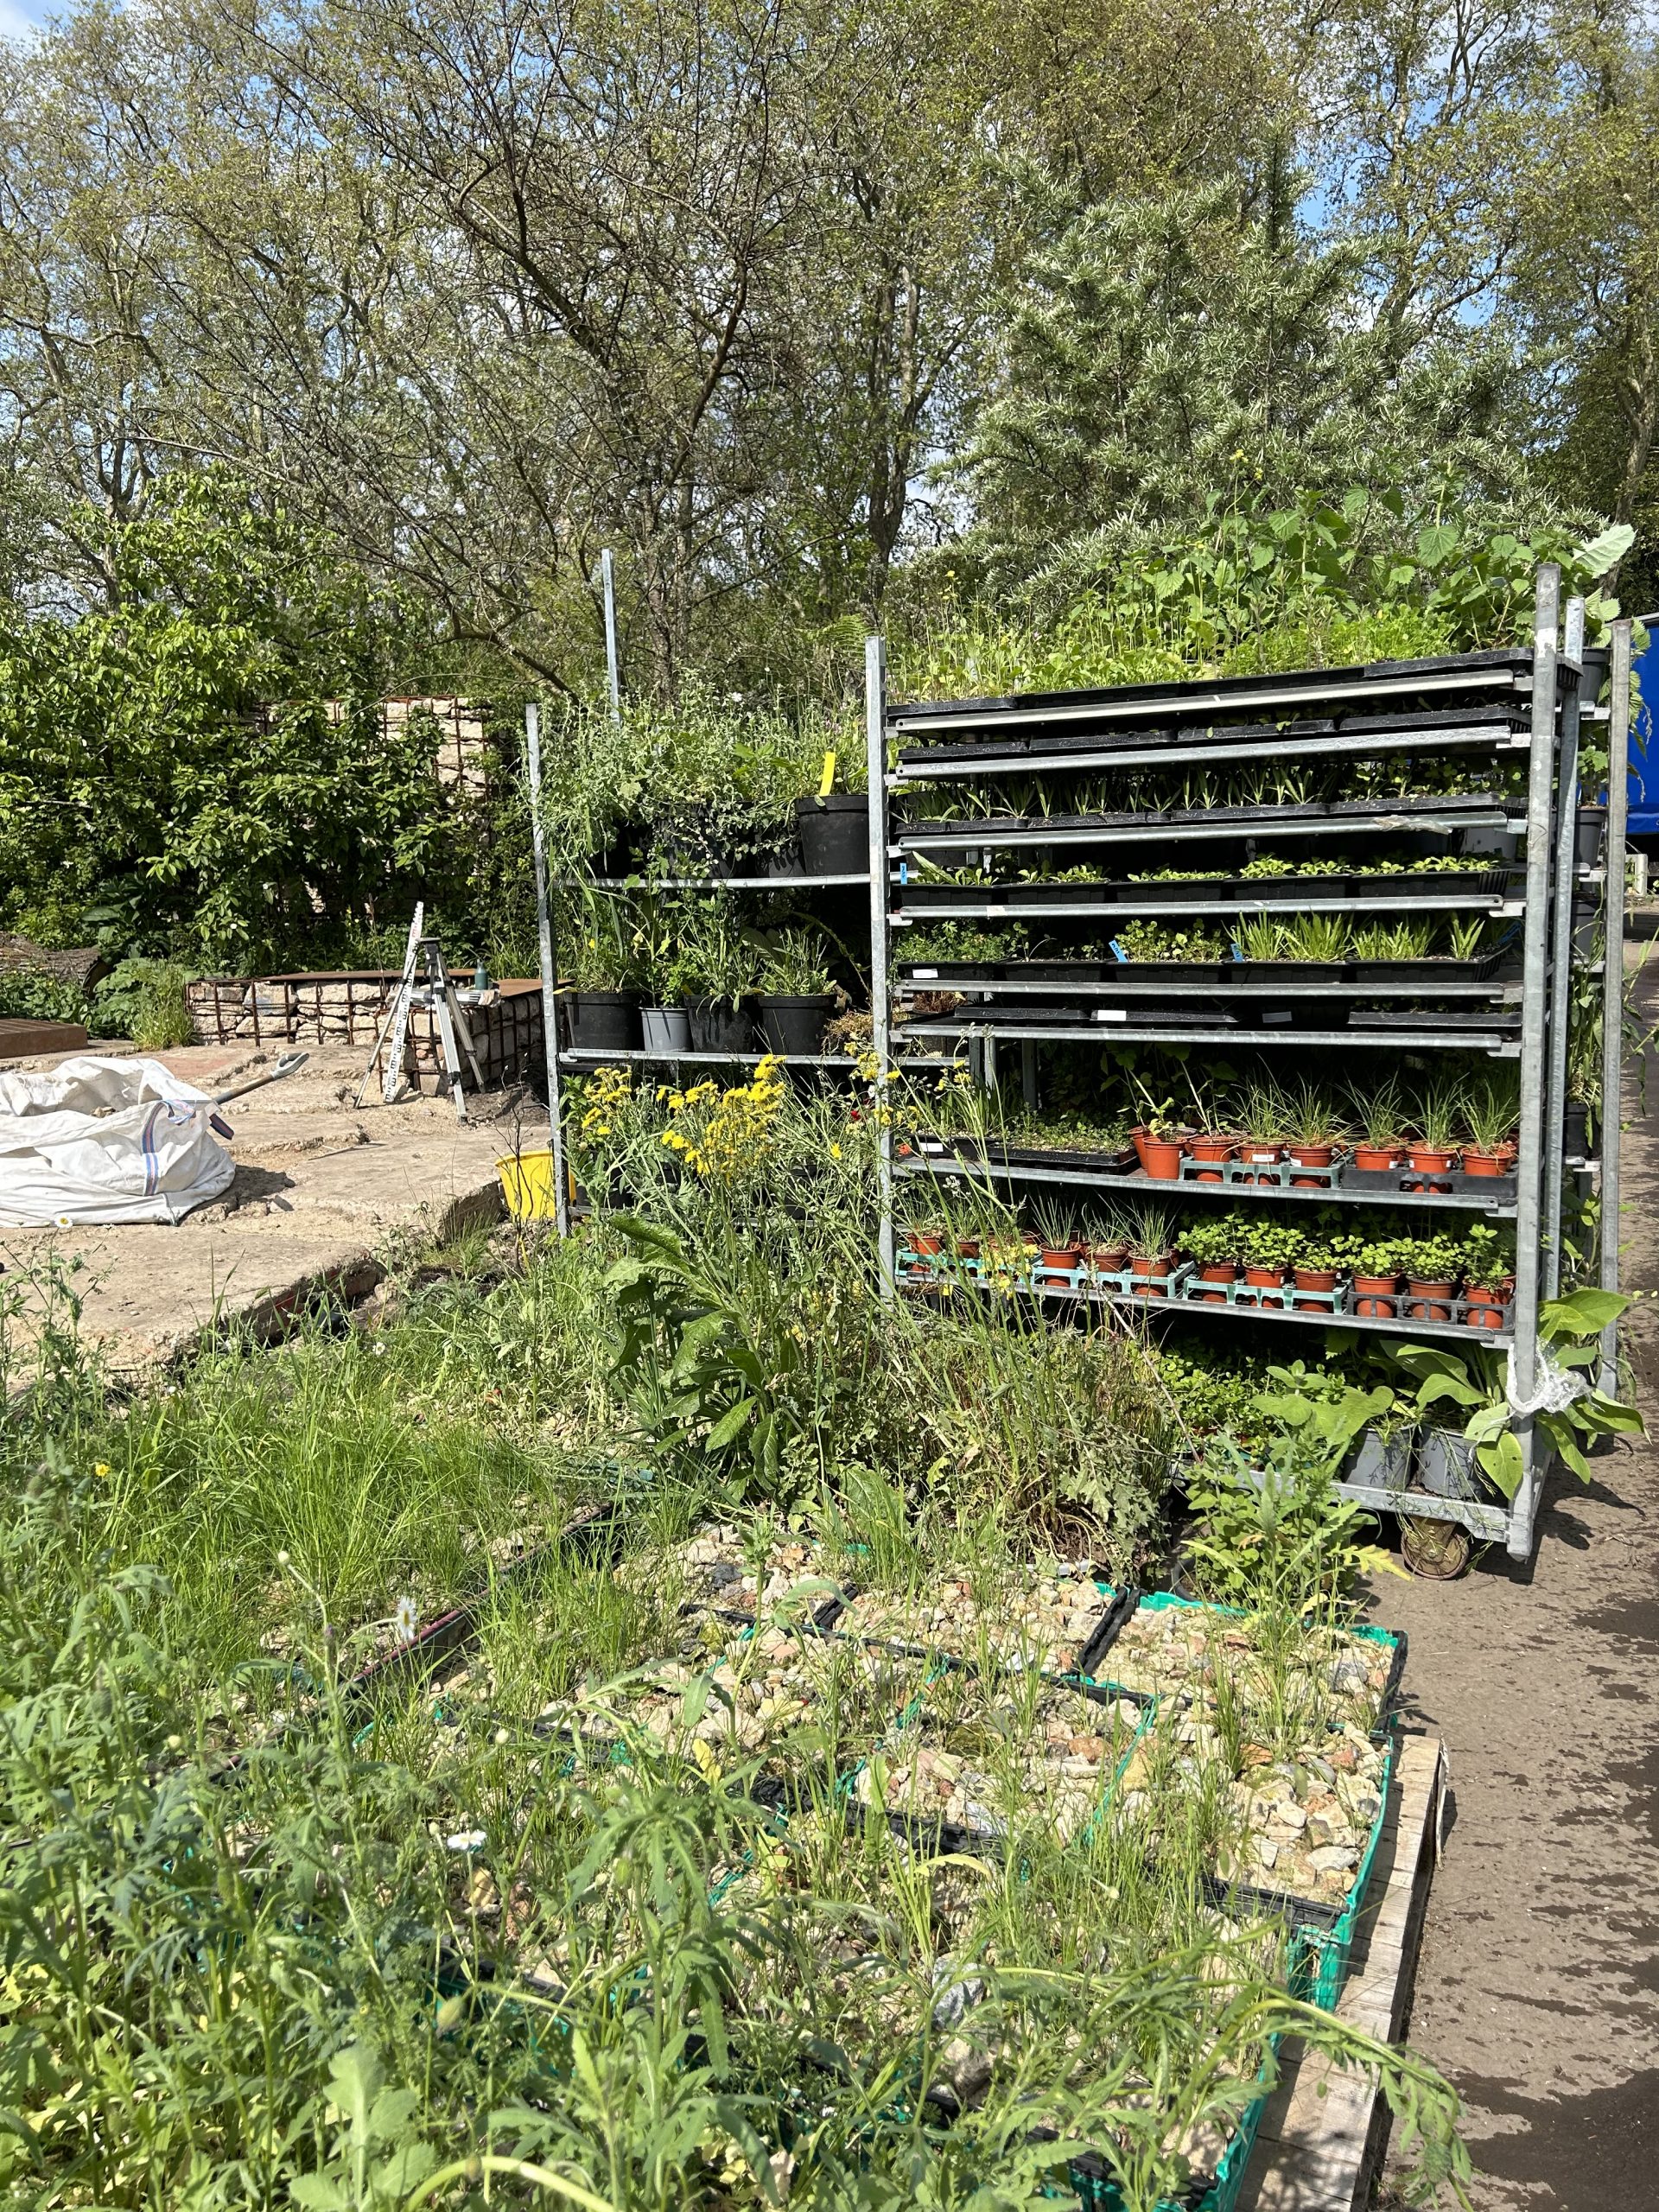 Plants stacked on trolleys ready to be planted